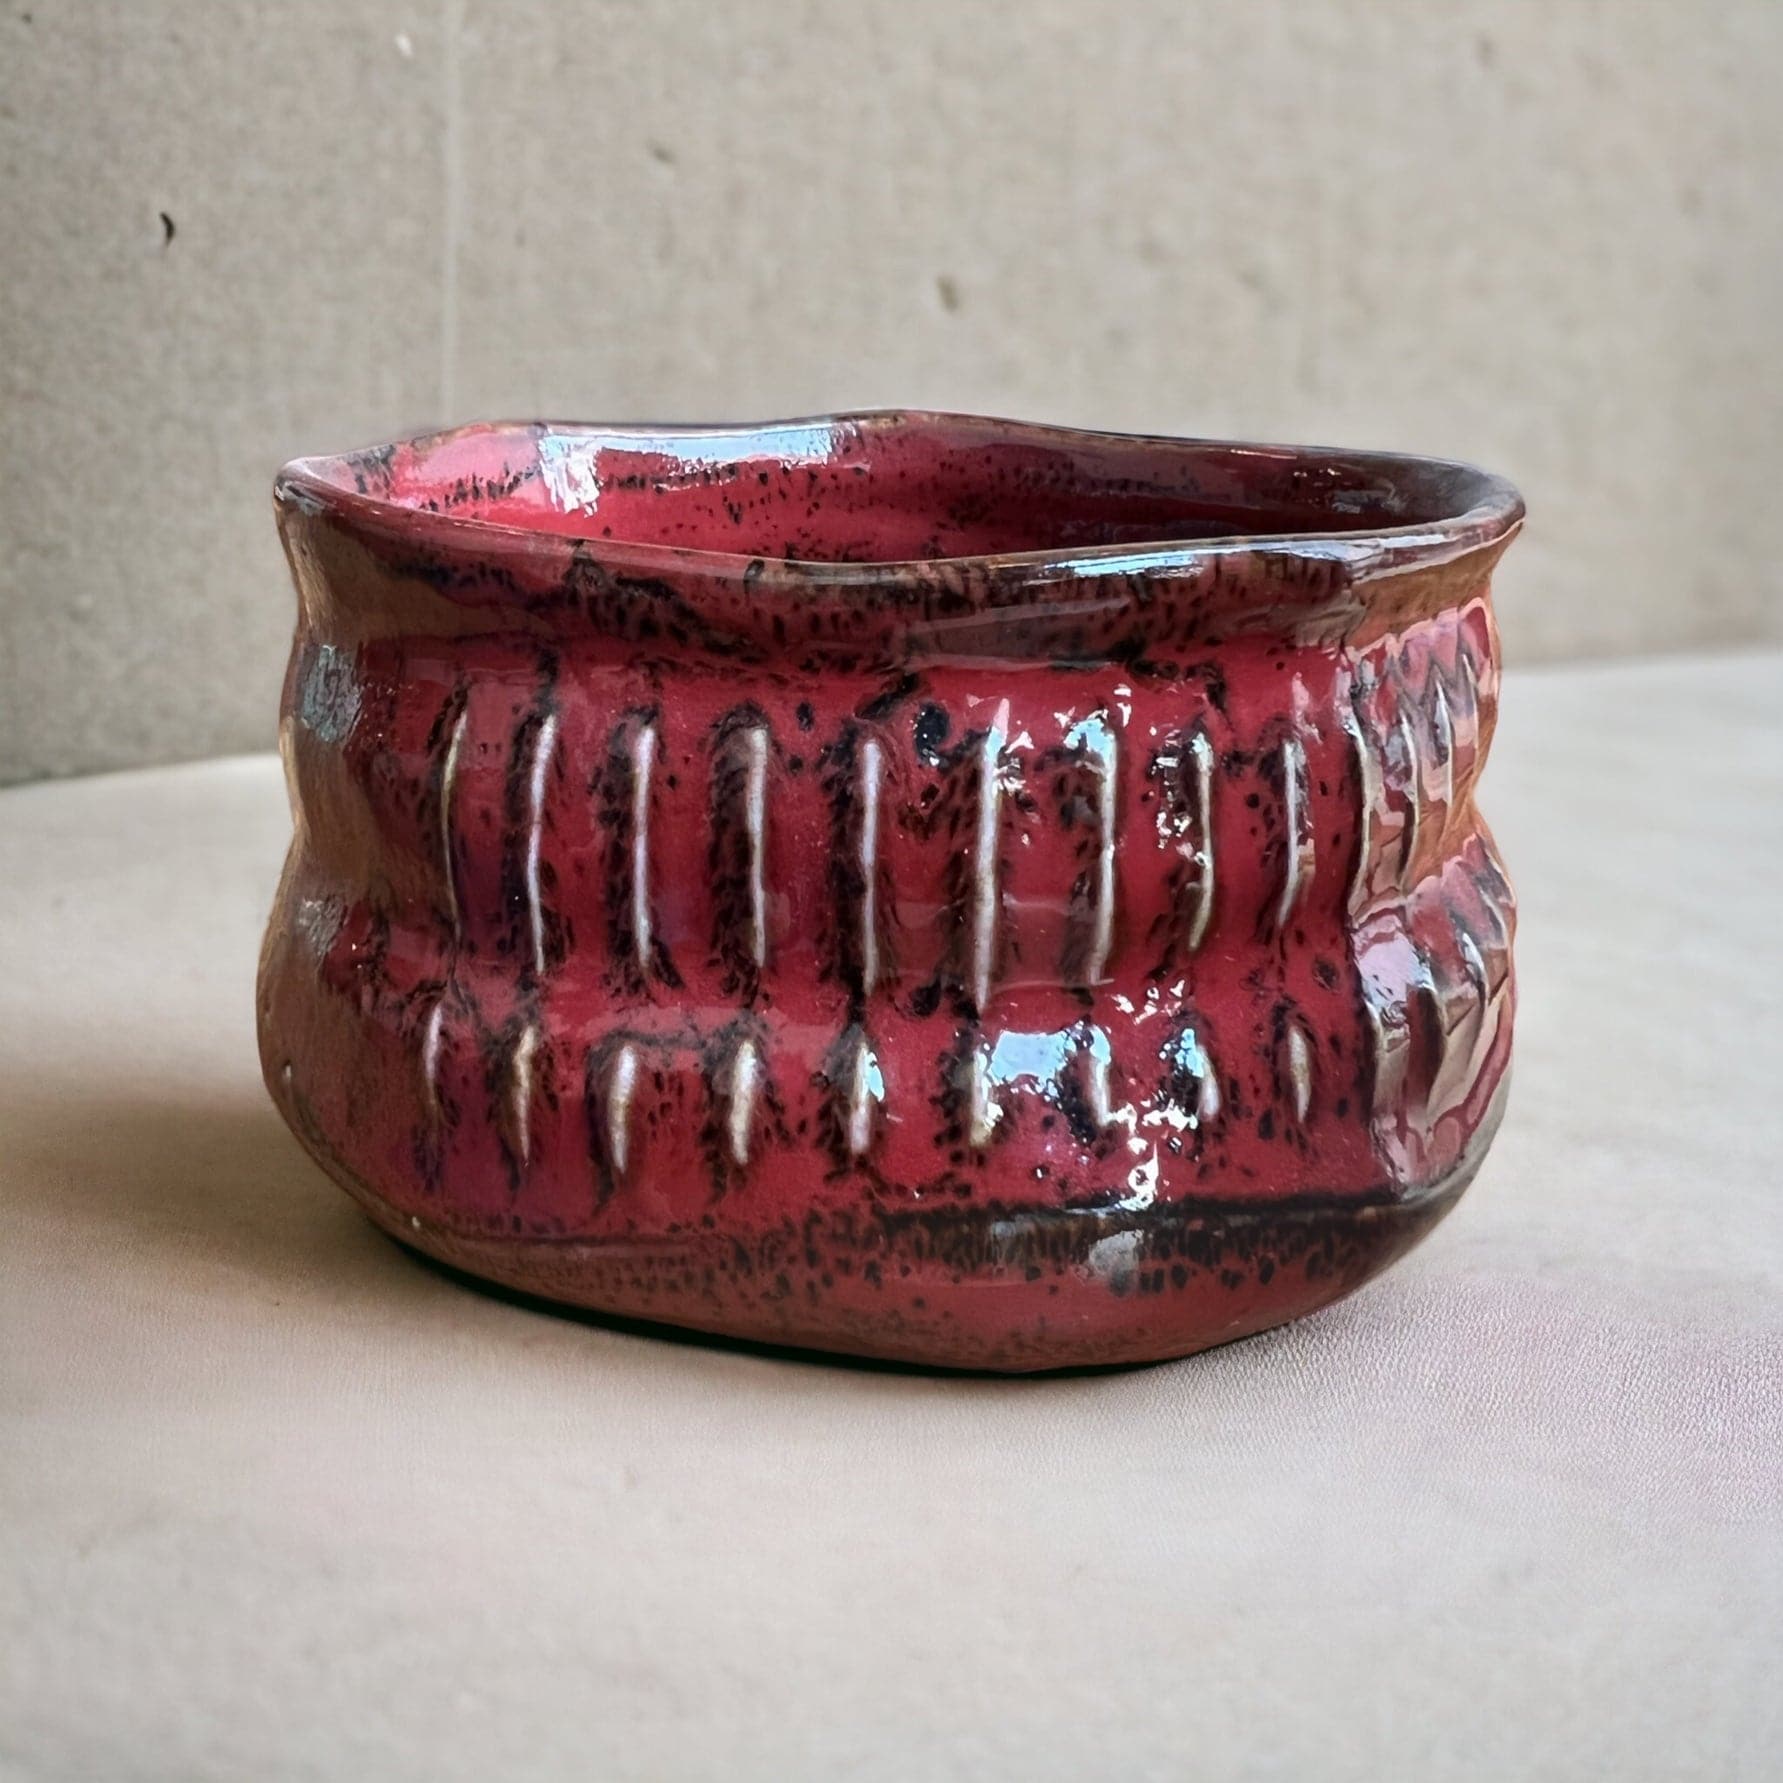 Side shot of the texturized red matcha bowl.